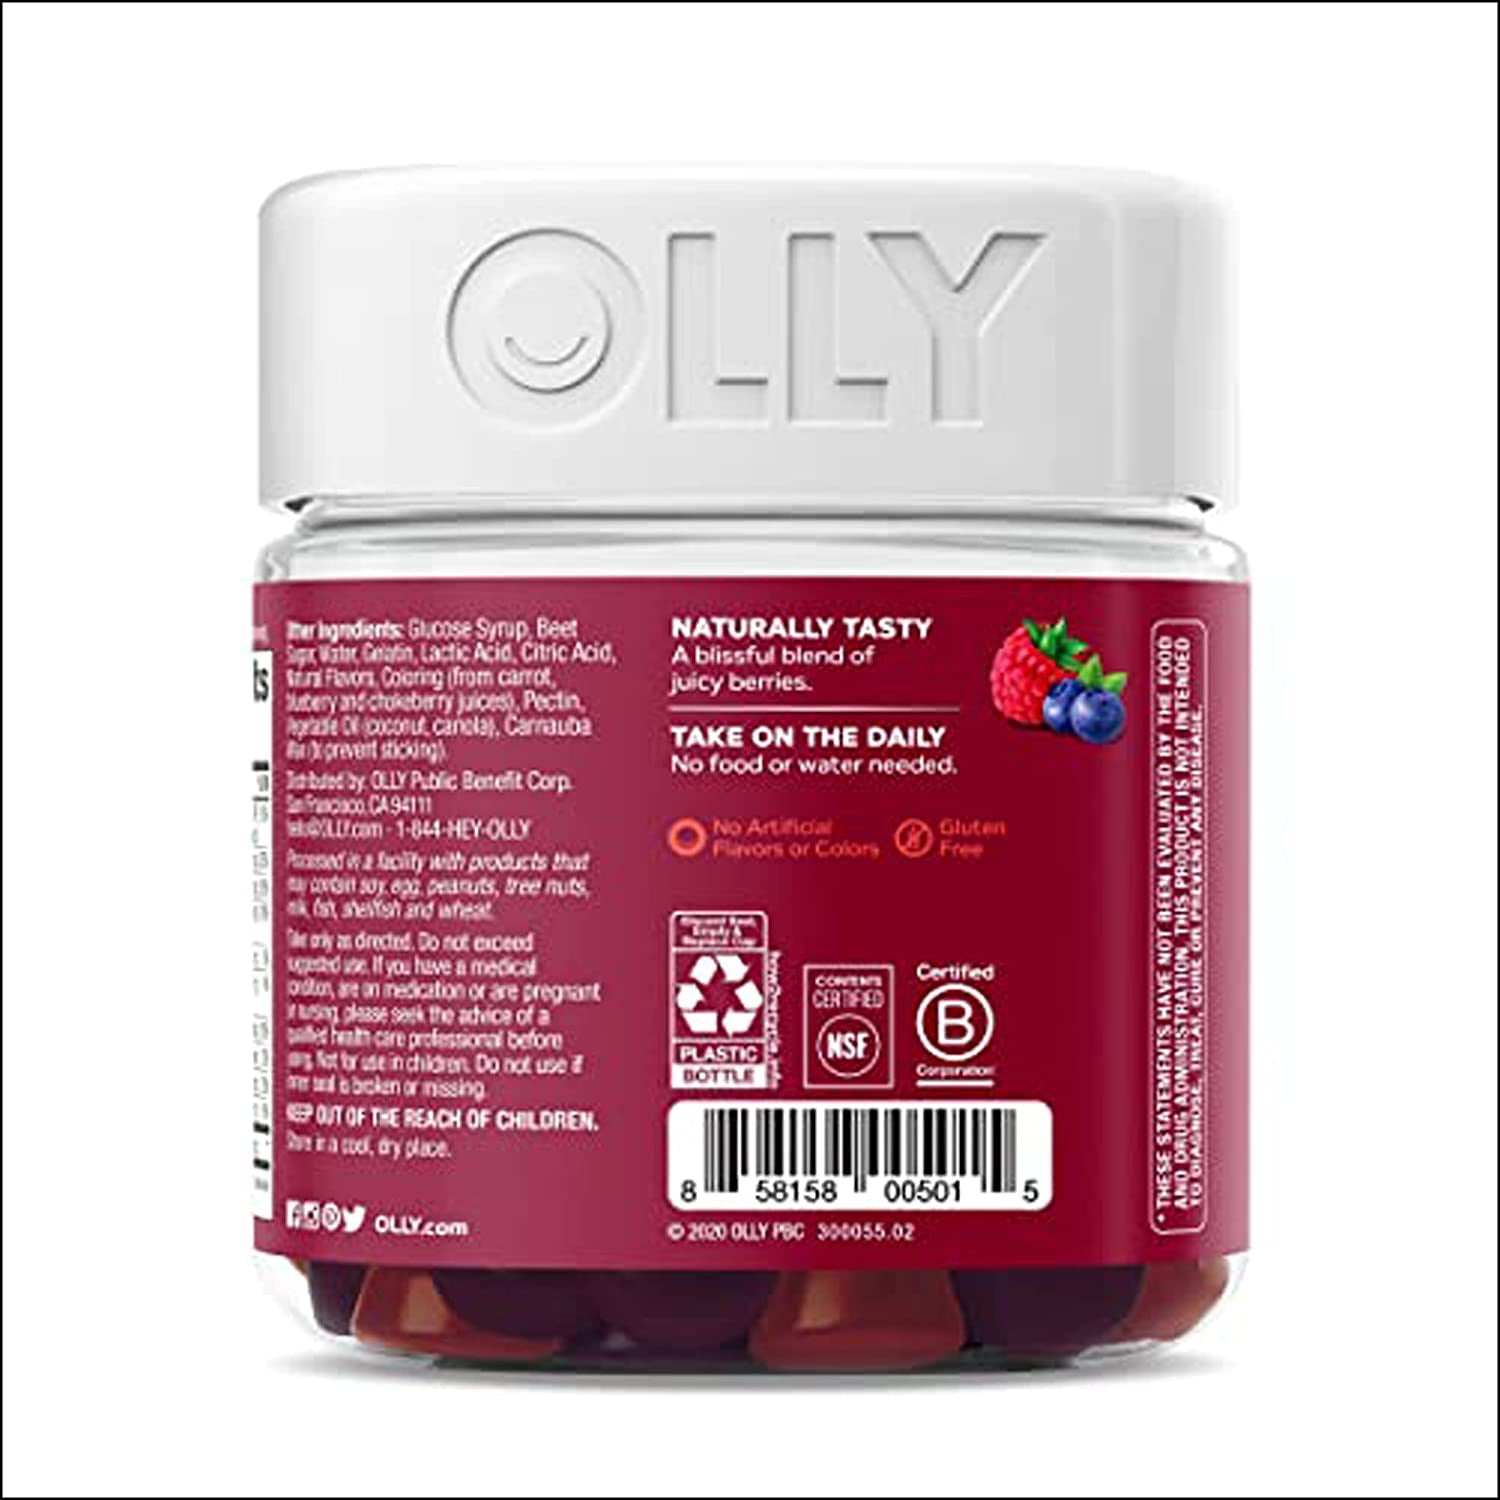 OLLY Women'S Multivitamin Gummy, Overall Health and Immune Support, Vitamins A, D, C, E, Biotin, Folic Acid, Adult Chewable Vitamin, Berry, 45 Day Supply - 90 Count (Pack of 1) - Free & Fast Delivery